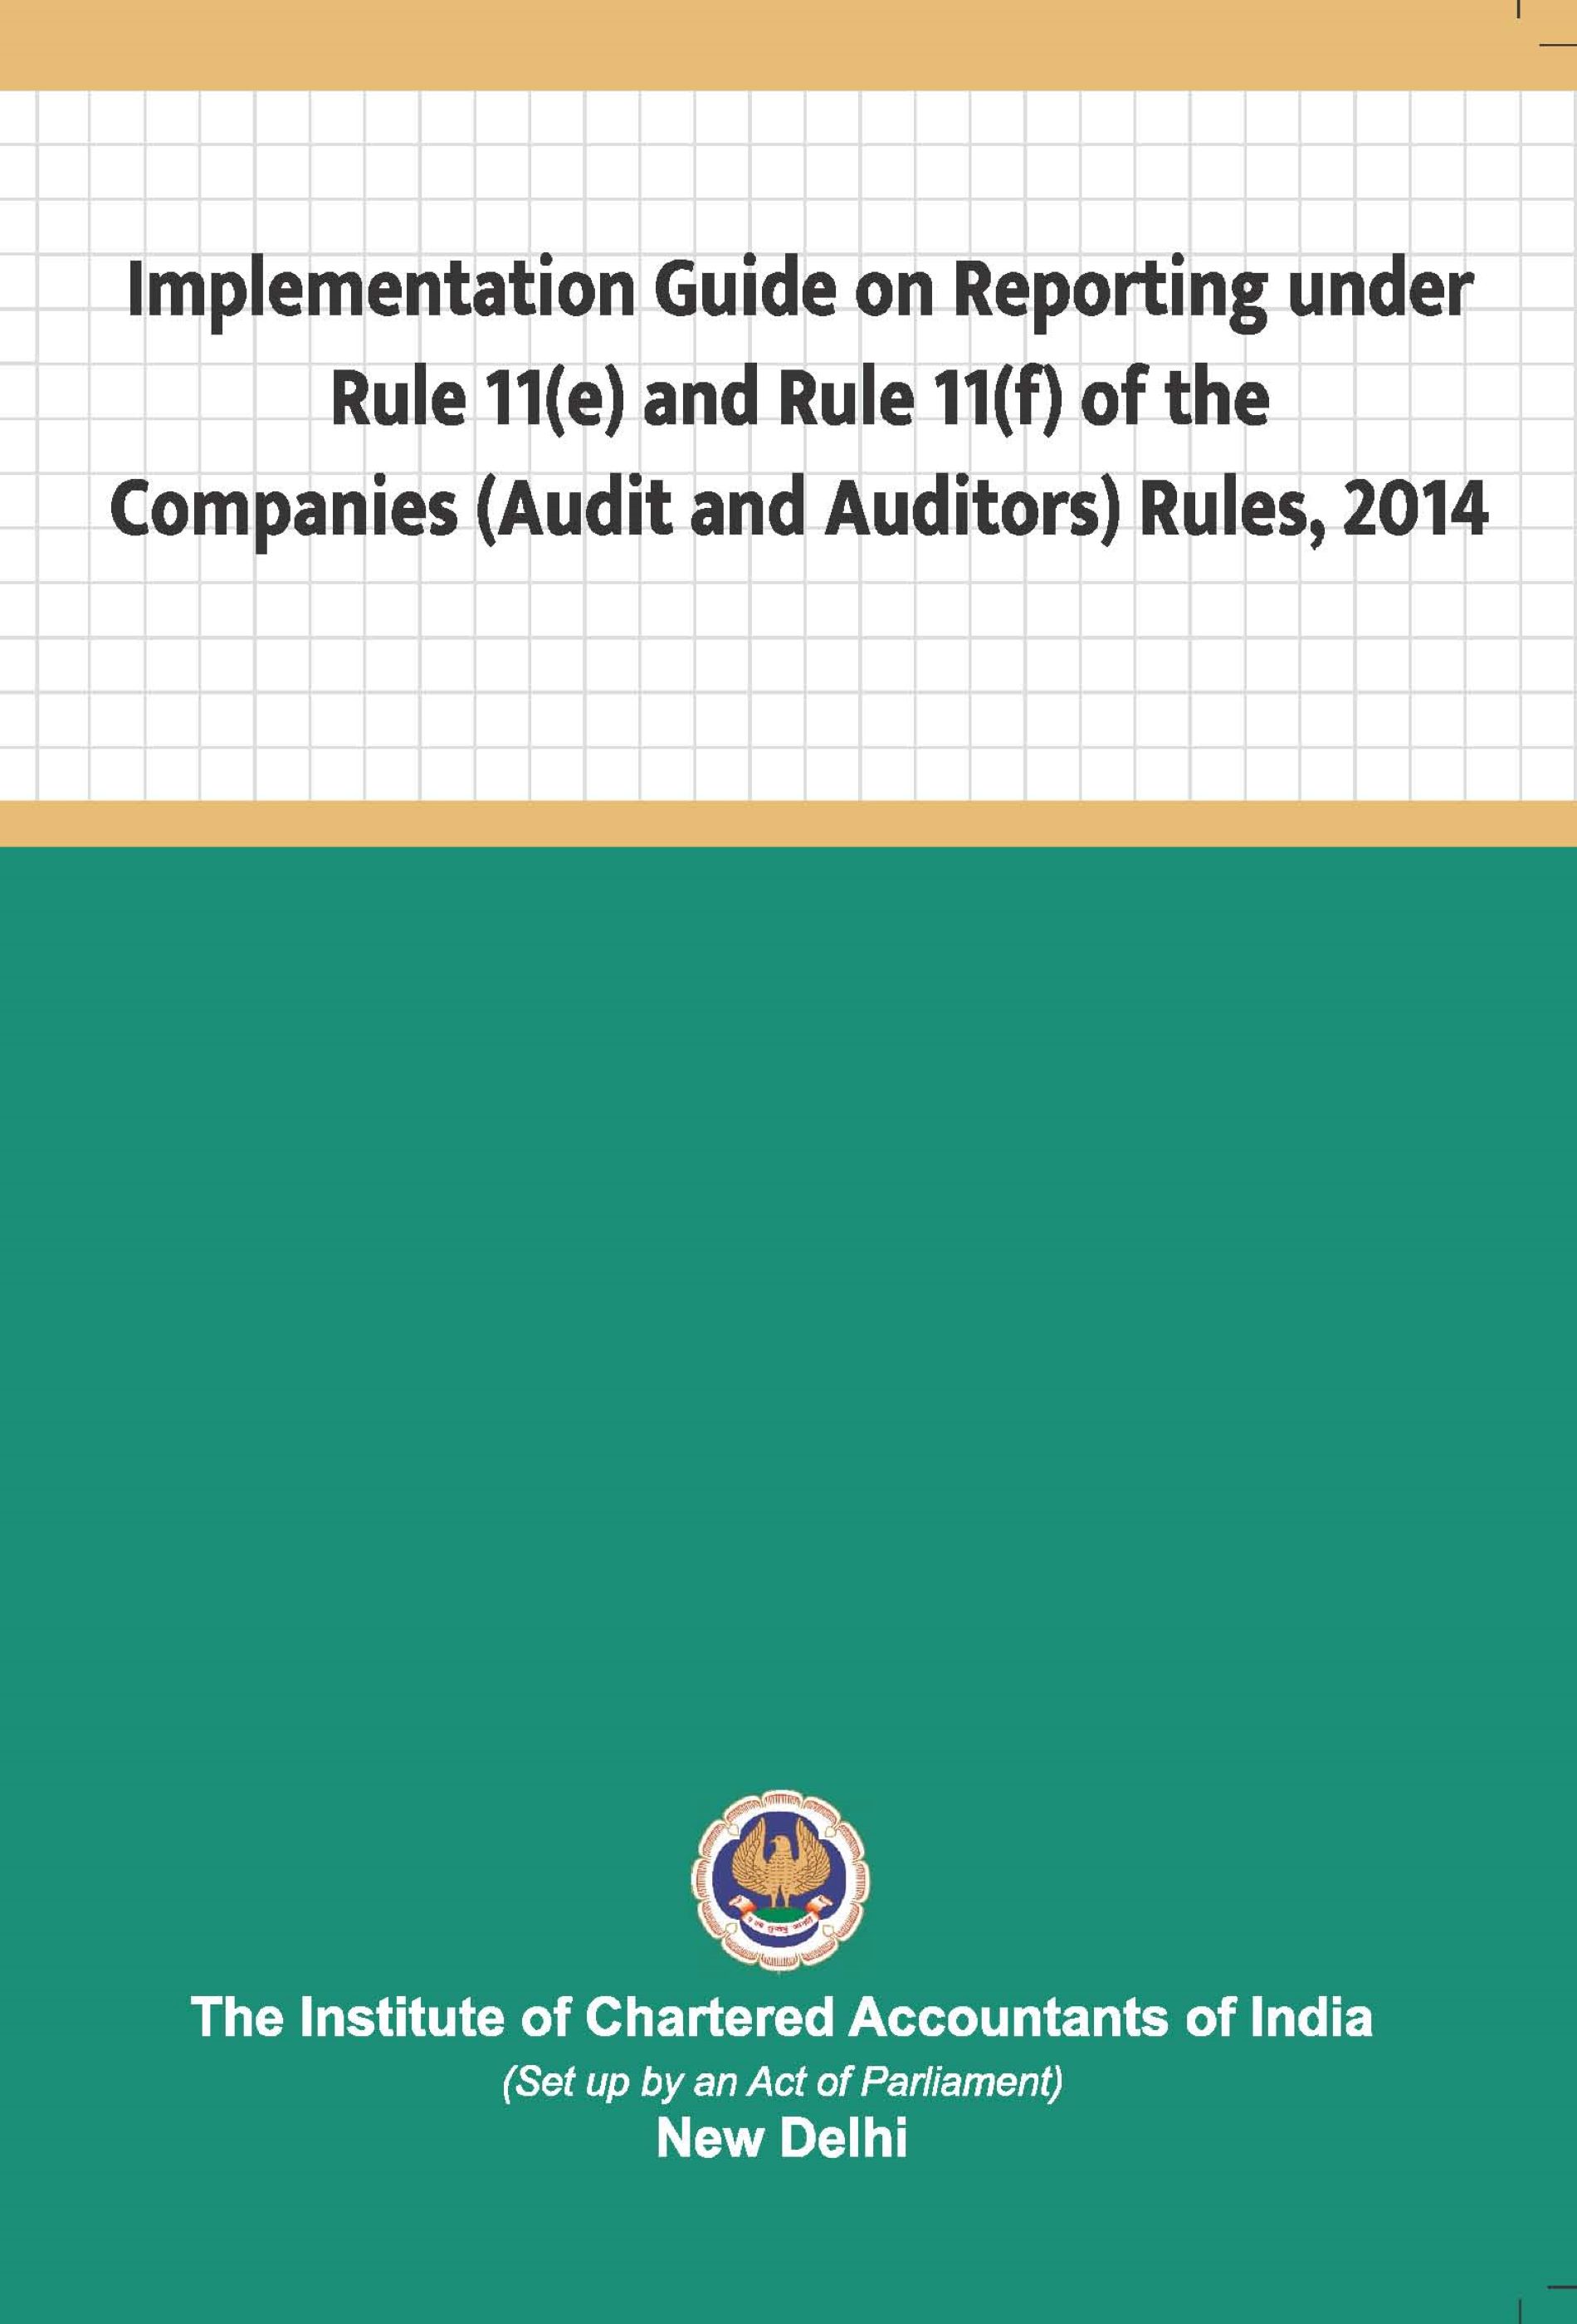 Implementation Guide on Reporting under Rule 11(e) and Rule 11(f) of the Companies (Audit and Auditors) Rule, 2014 (April 2022)